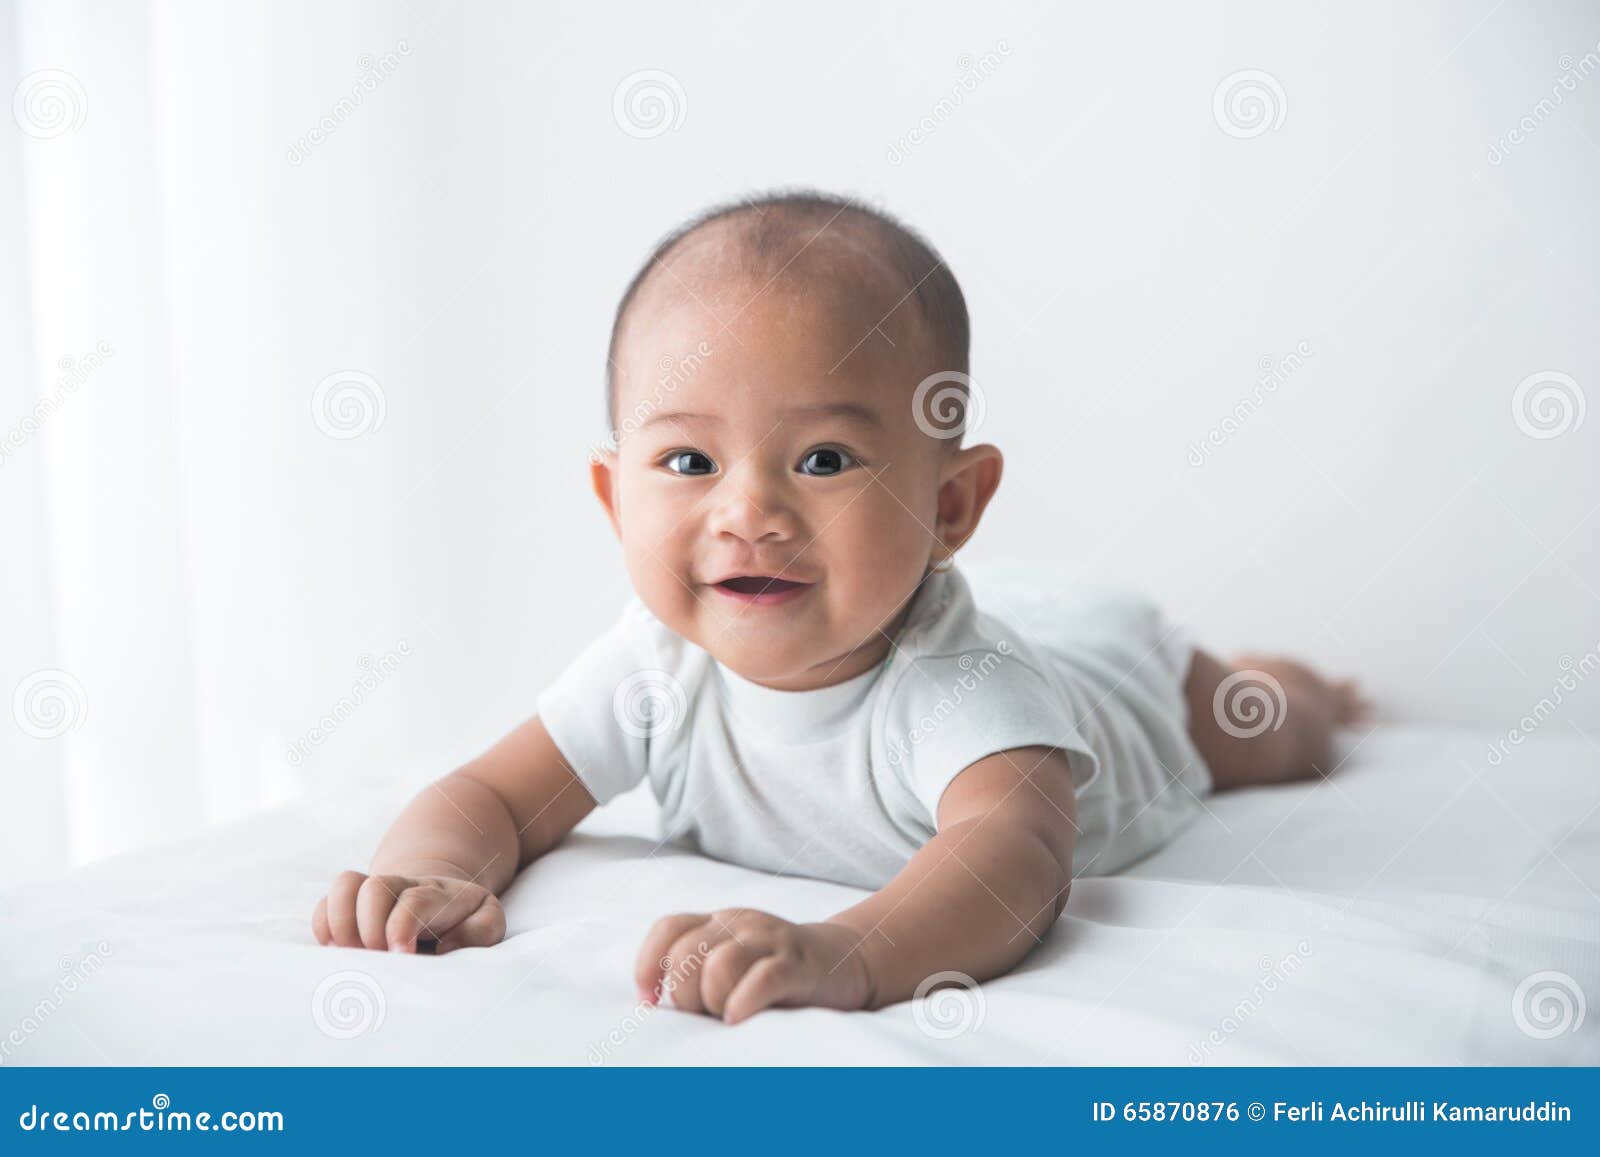 smiling happy baby tummy time